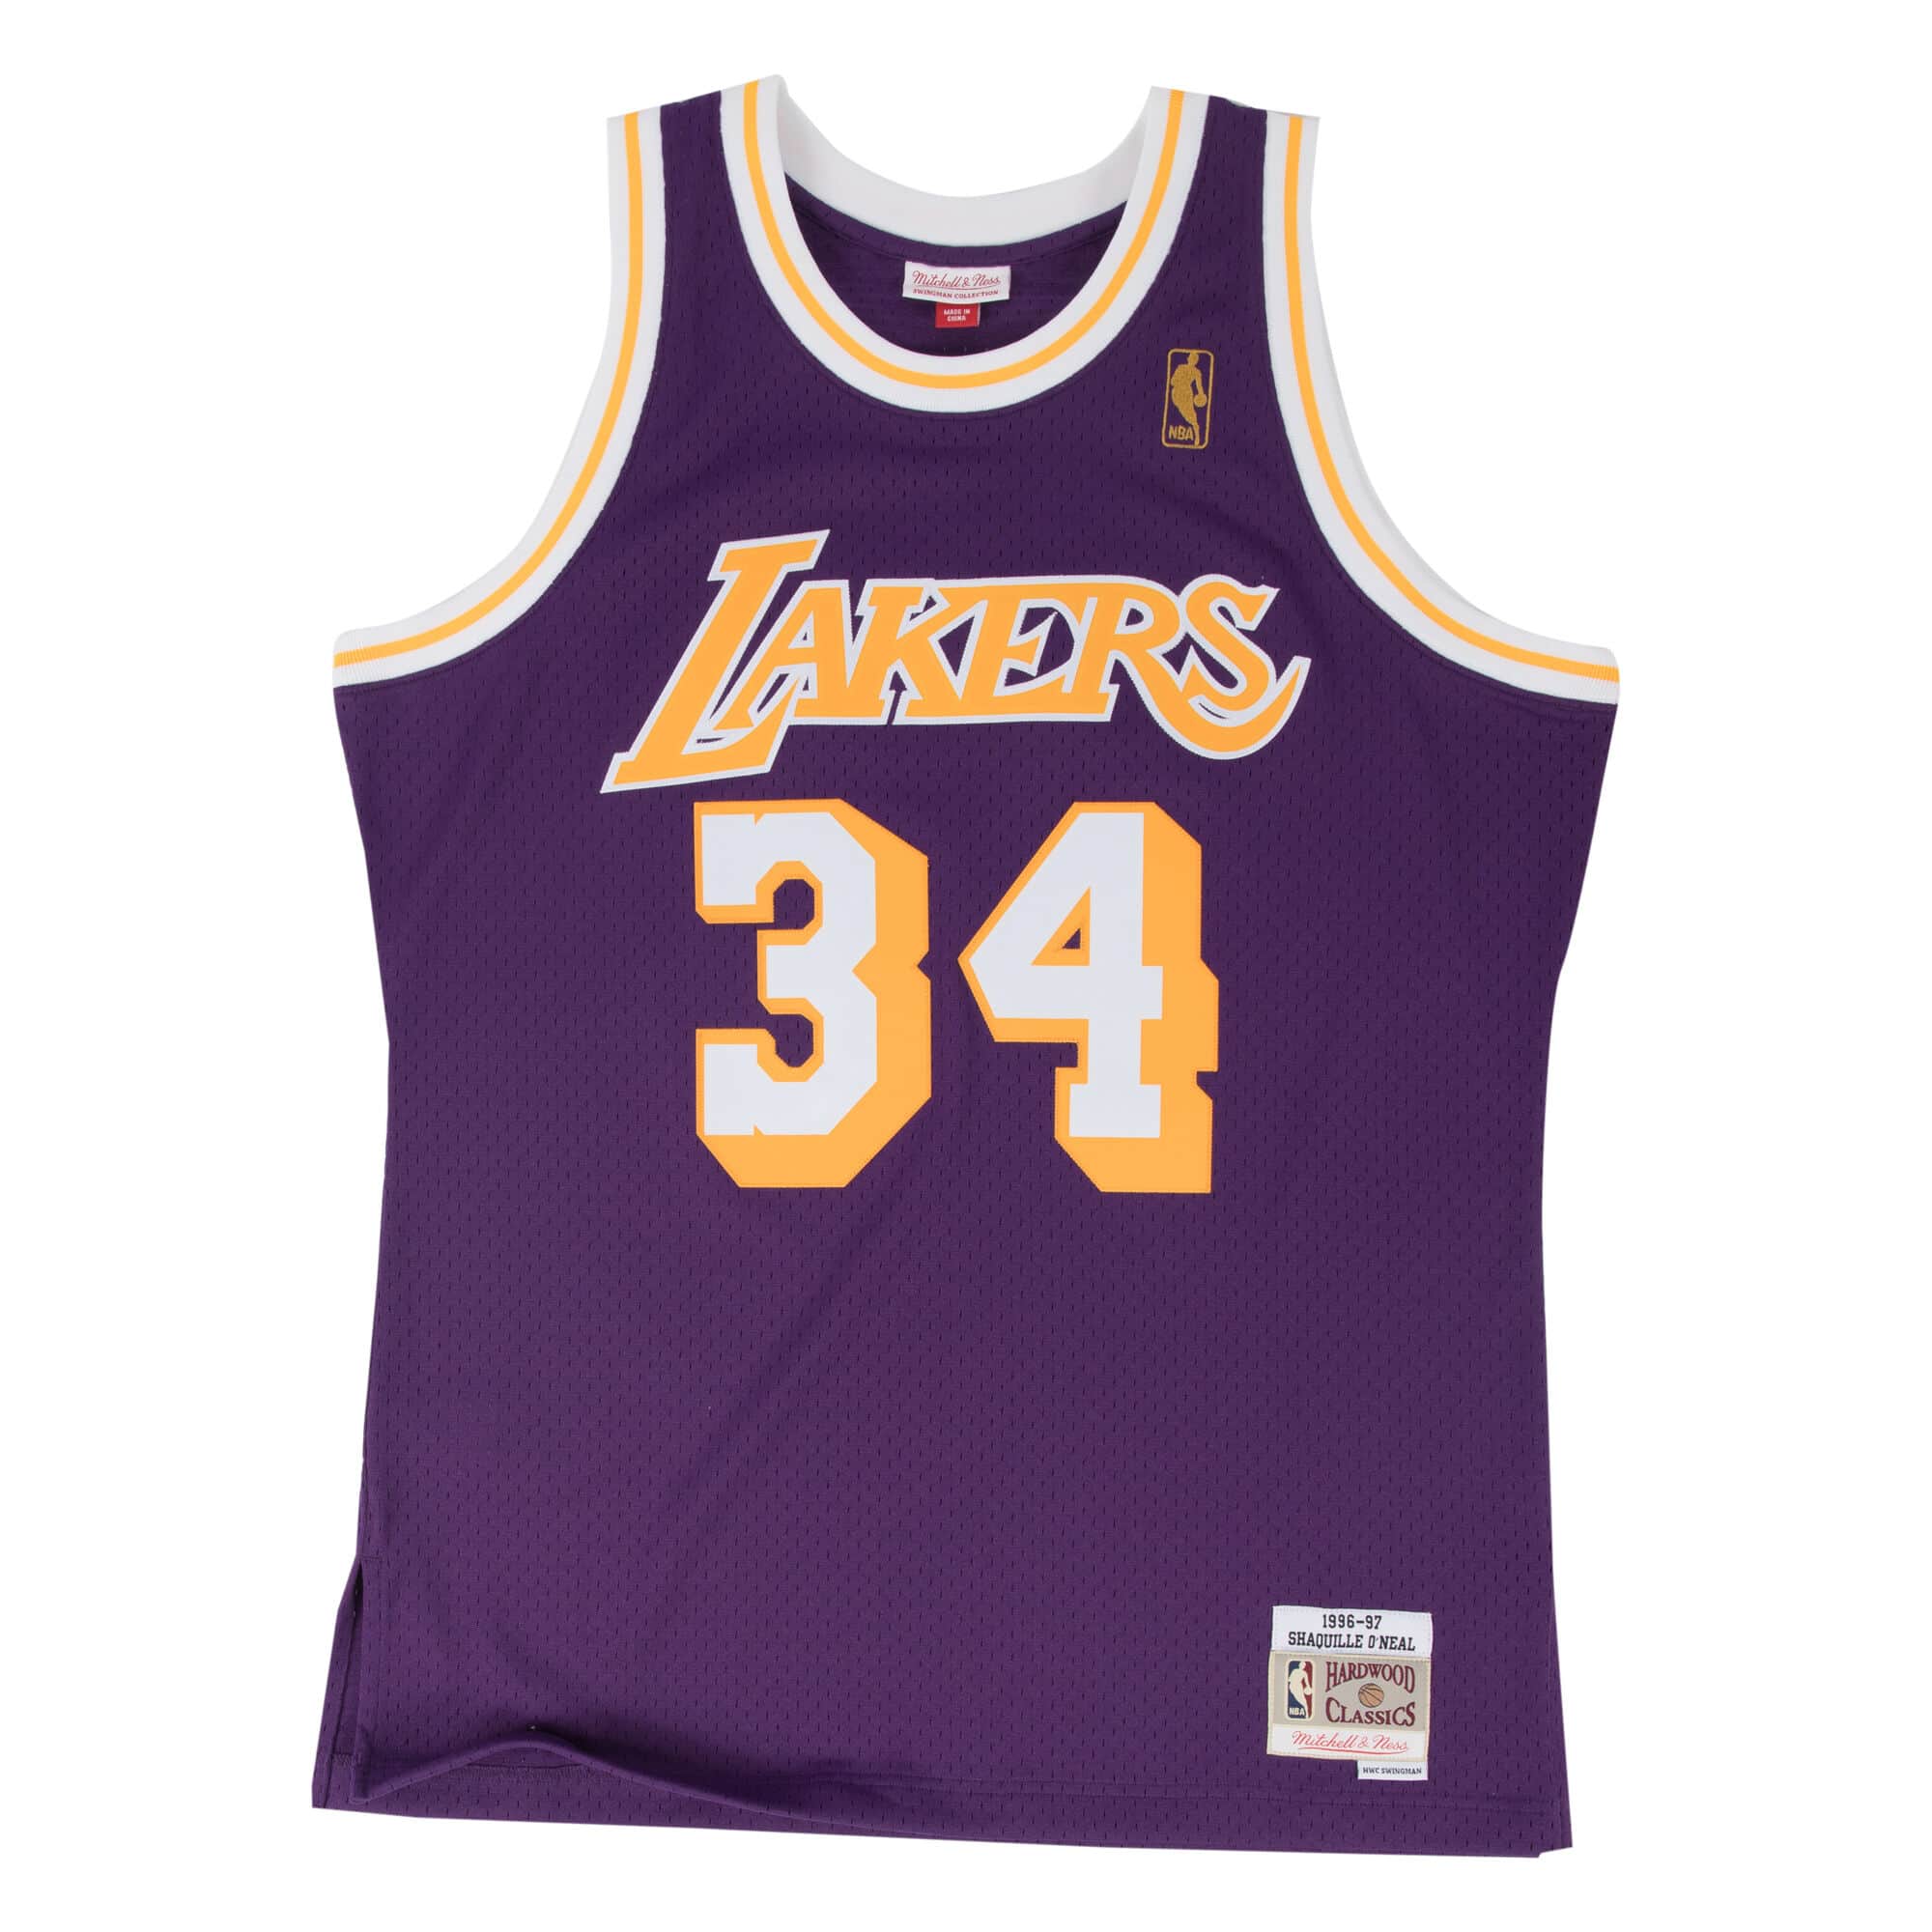 Shaquille O'Neal Lakers Signed Mitchell & Ness Light Blue